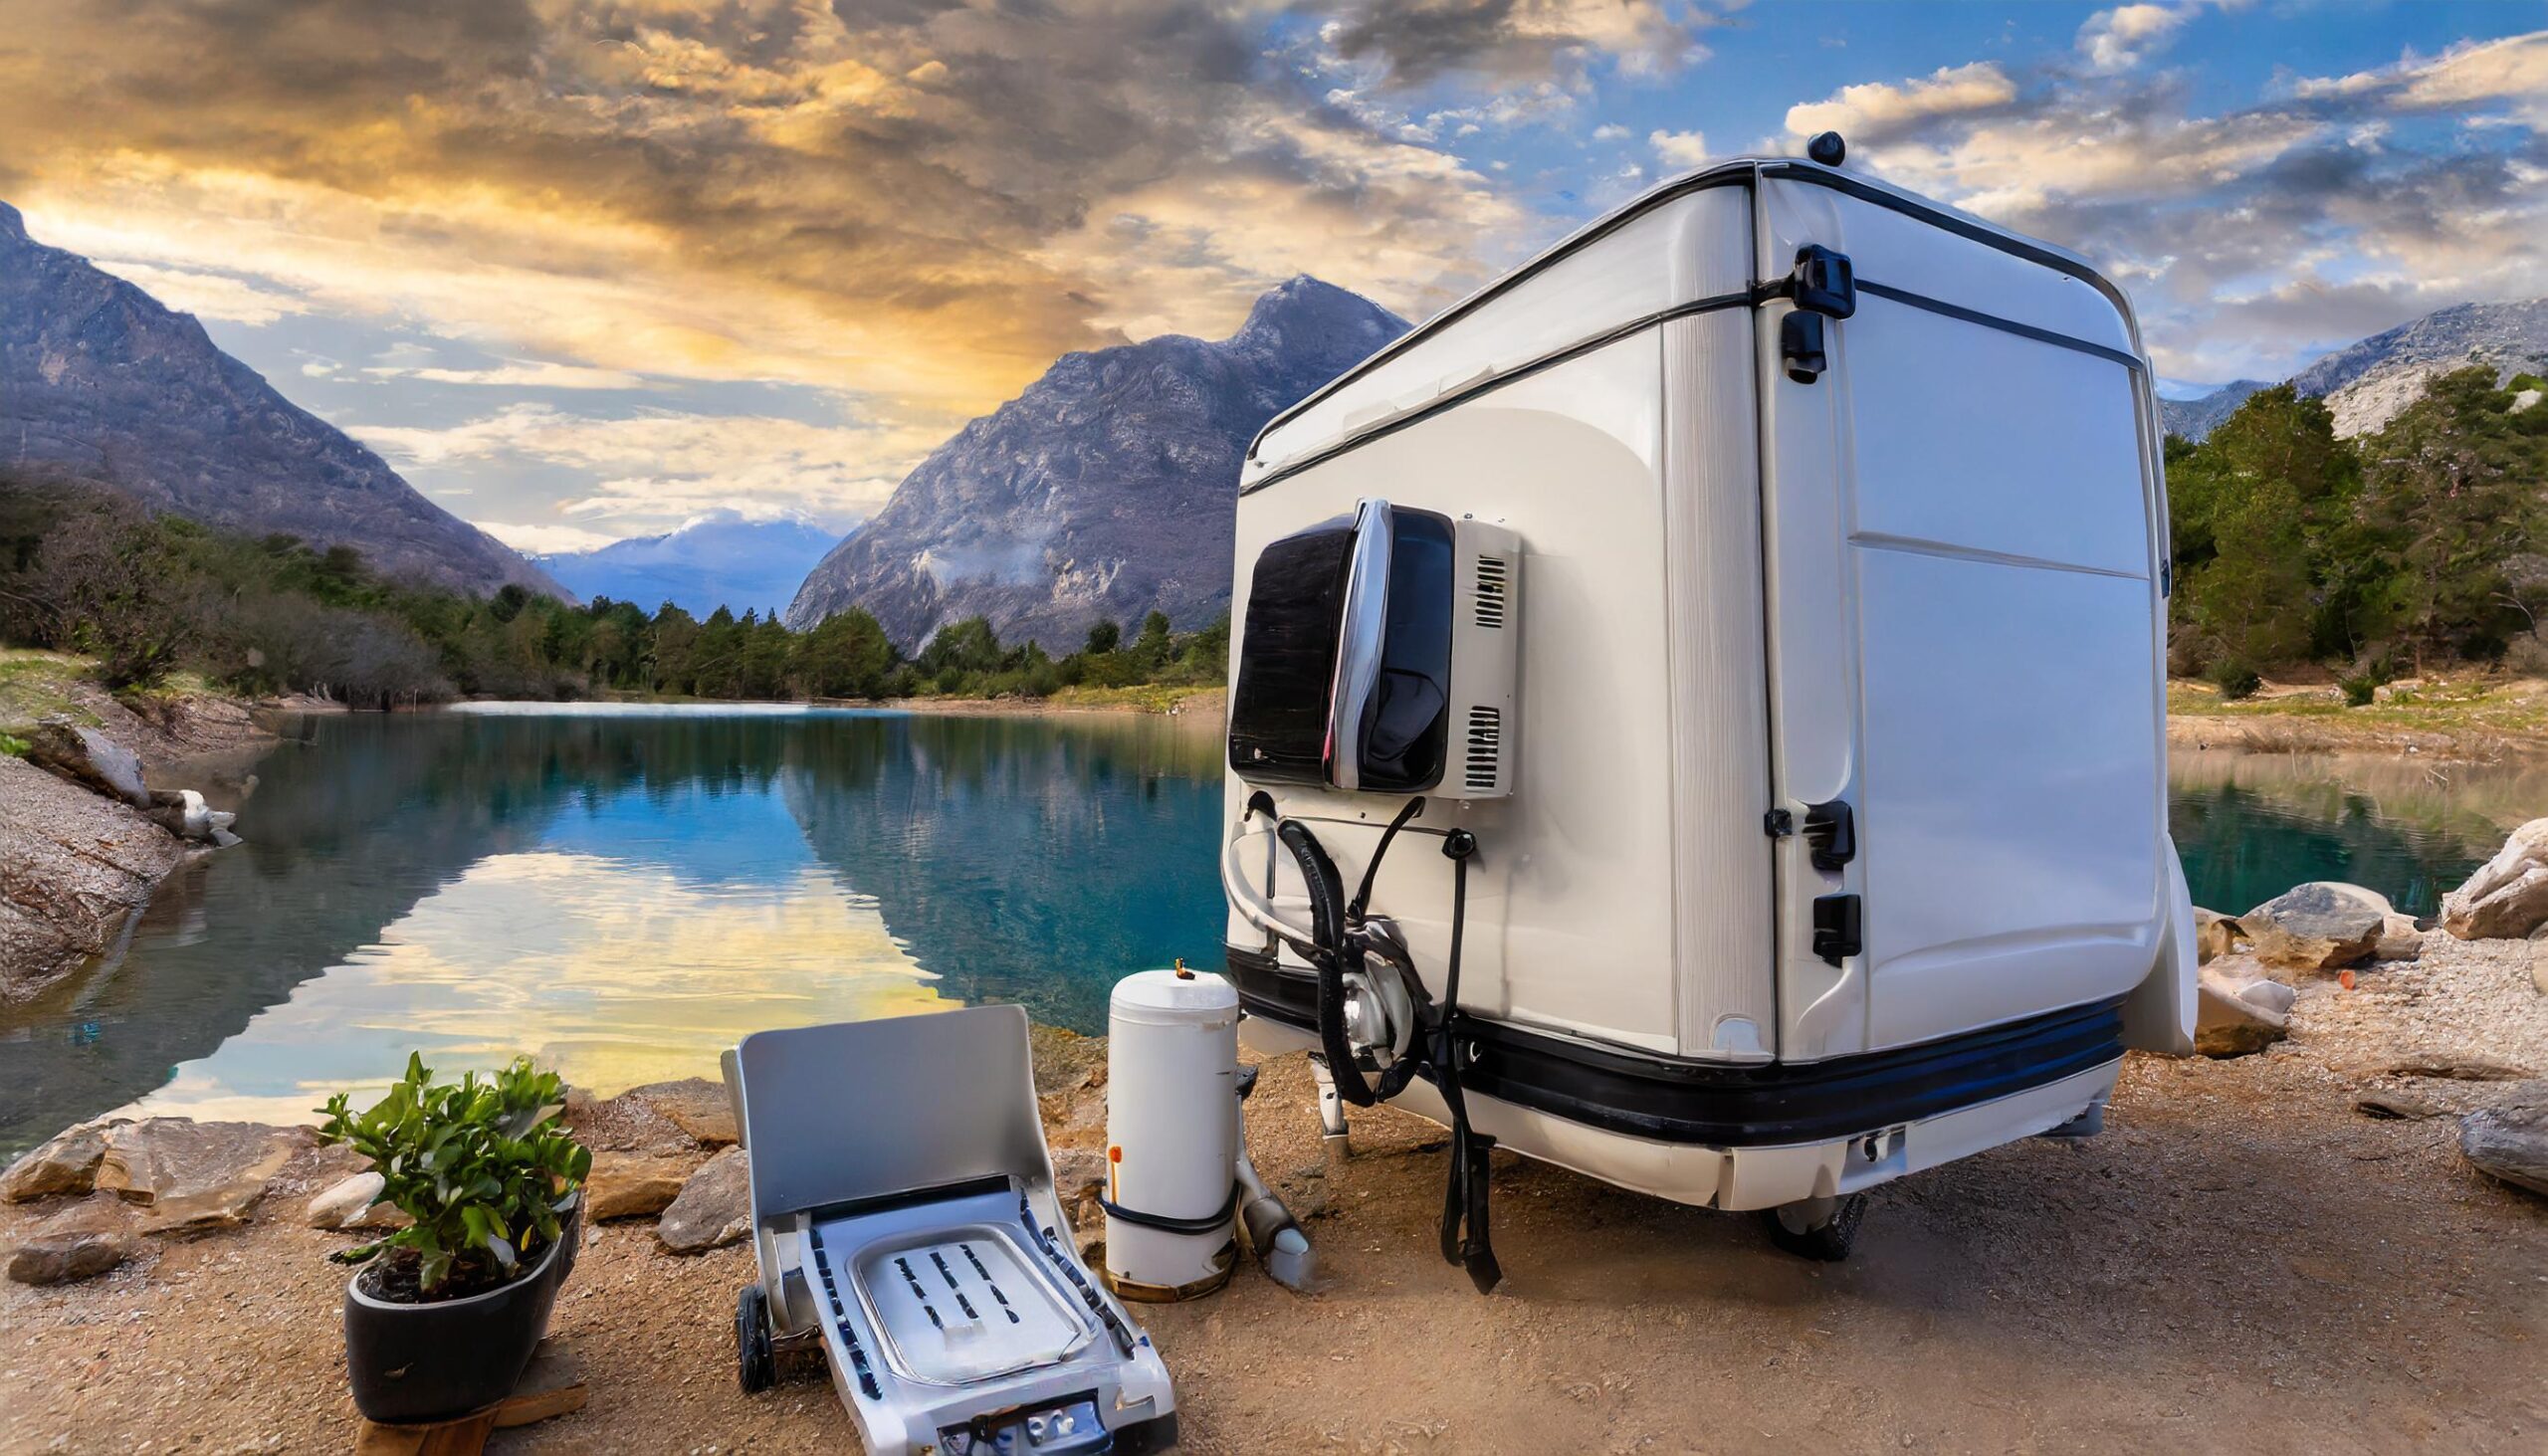 Choosing the Right Hot Water Heater for an RV